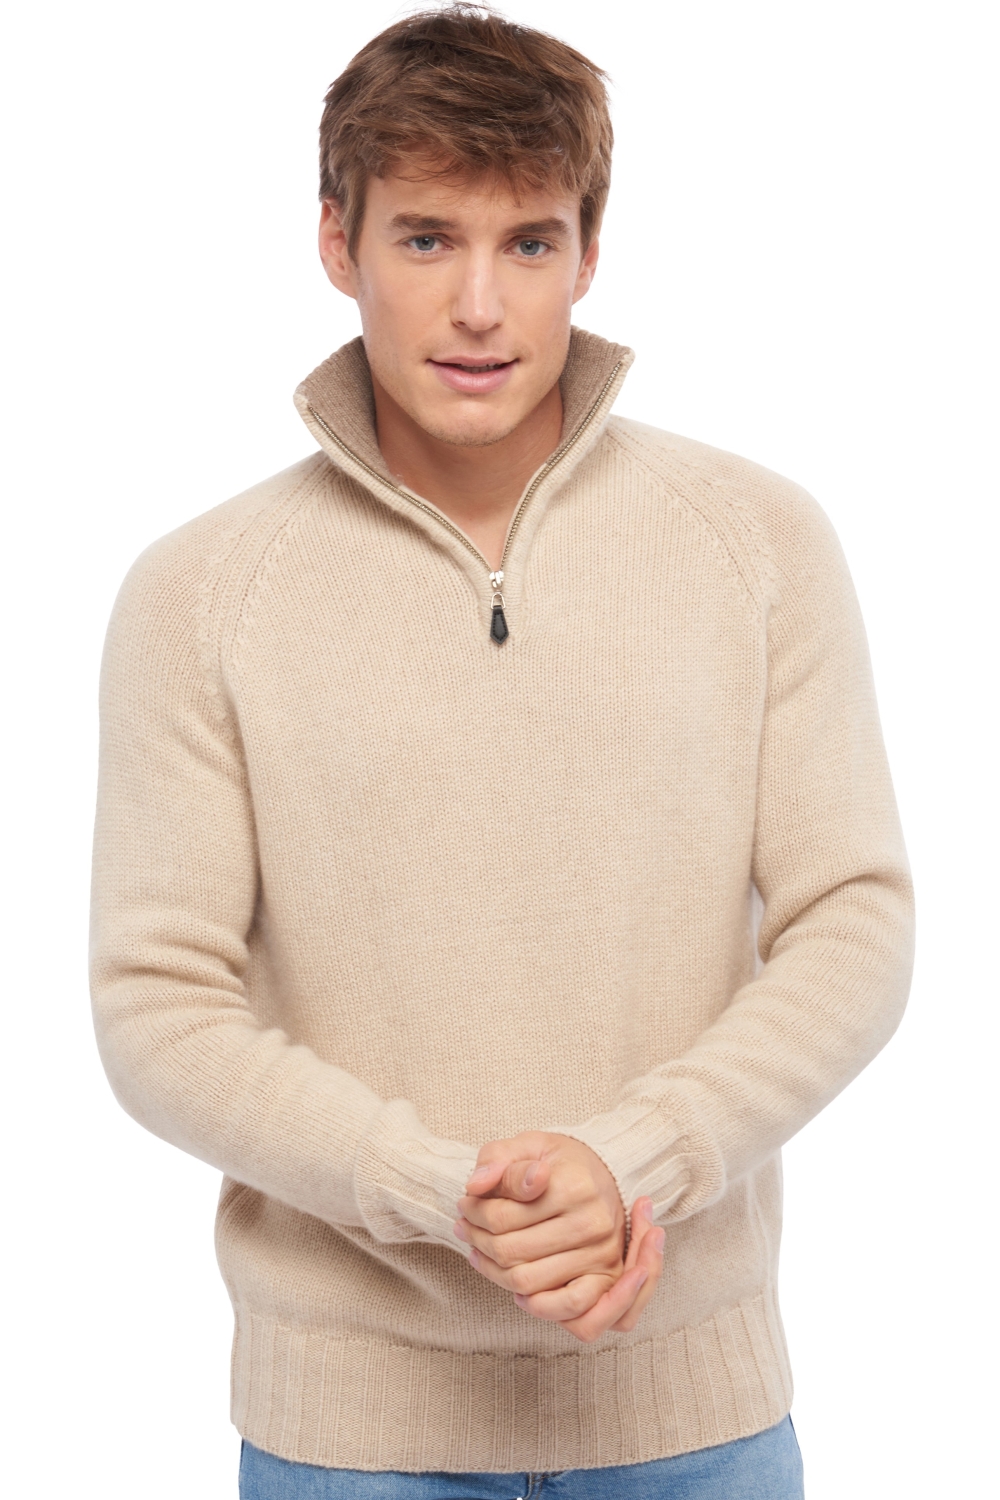 Cashmere men polo style sweaters olivier natural beige natural brown l